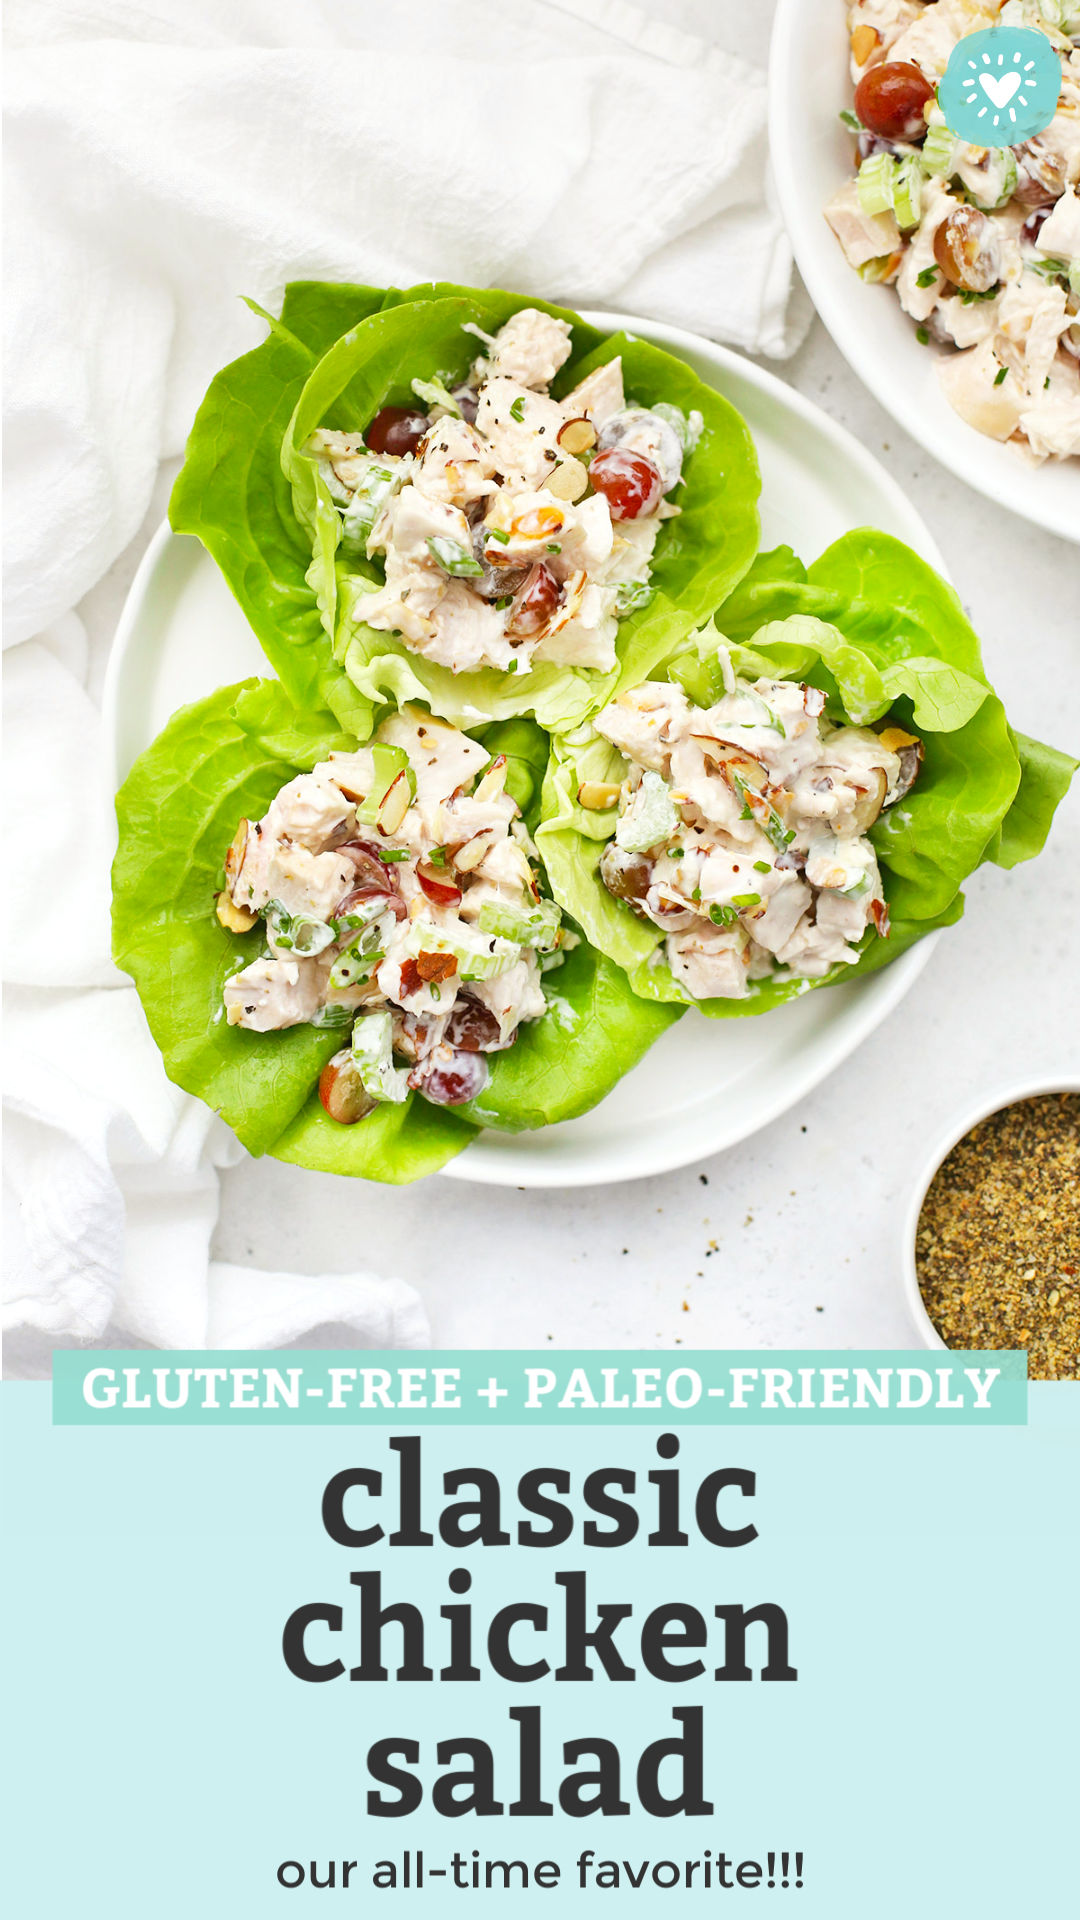 Three chicken salad lettuce wraps on a plate with text overlay that reads "Gluten-Free + Paleo-Friendly Classic Chicken Salad. Our all-time favorite!!!"